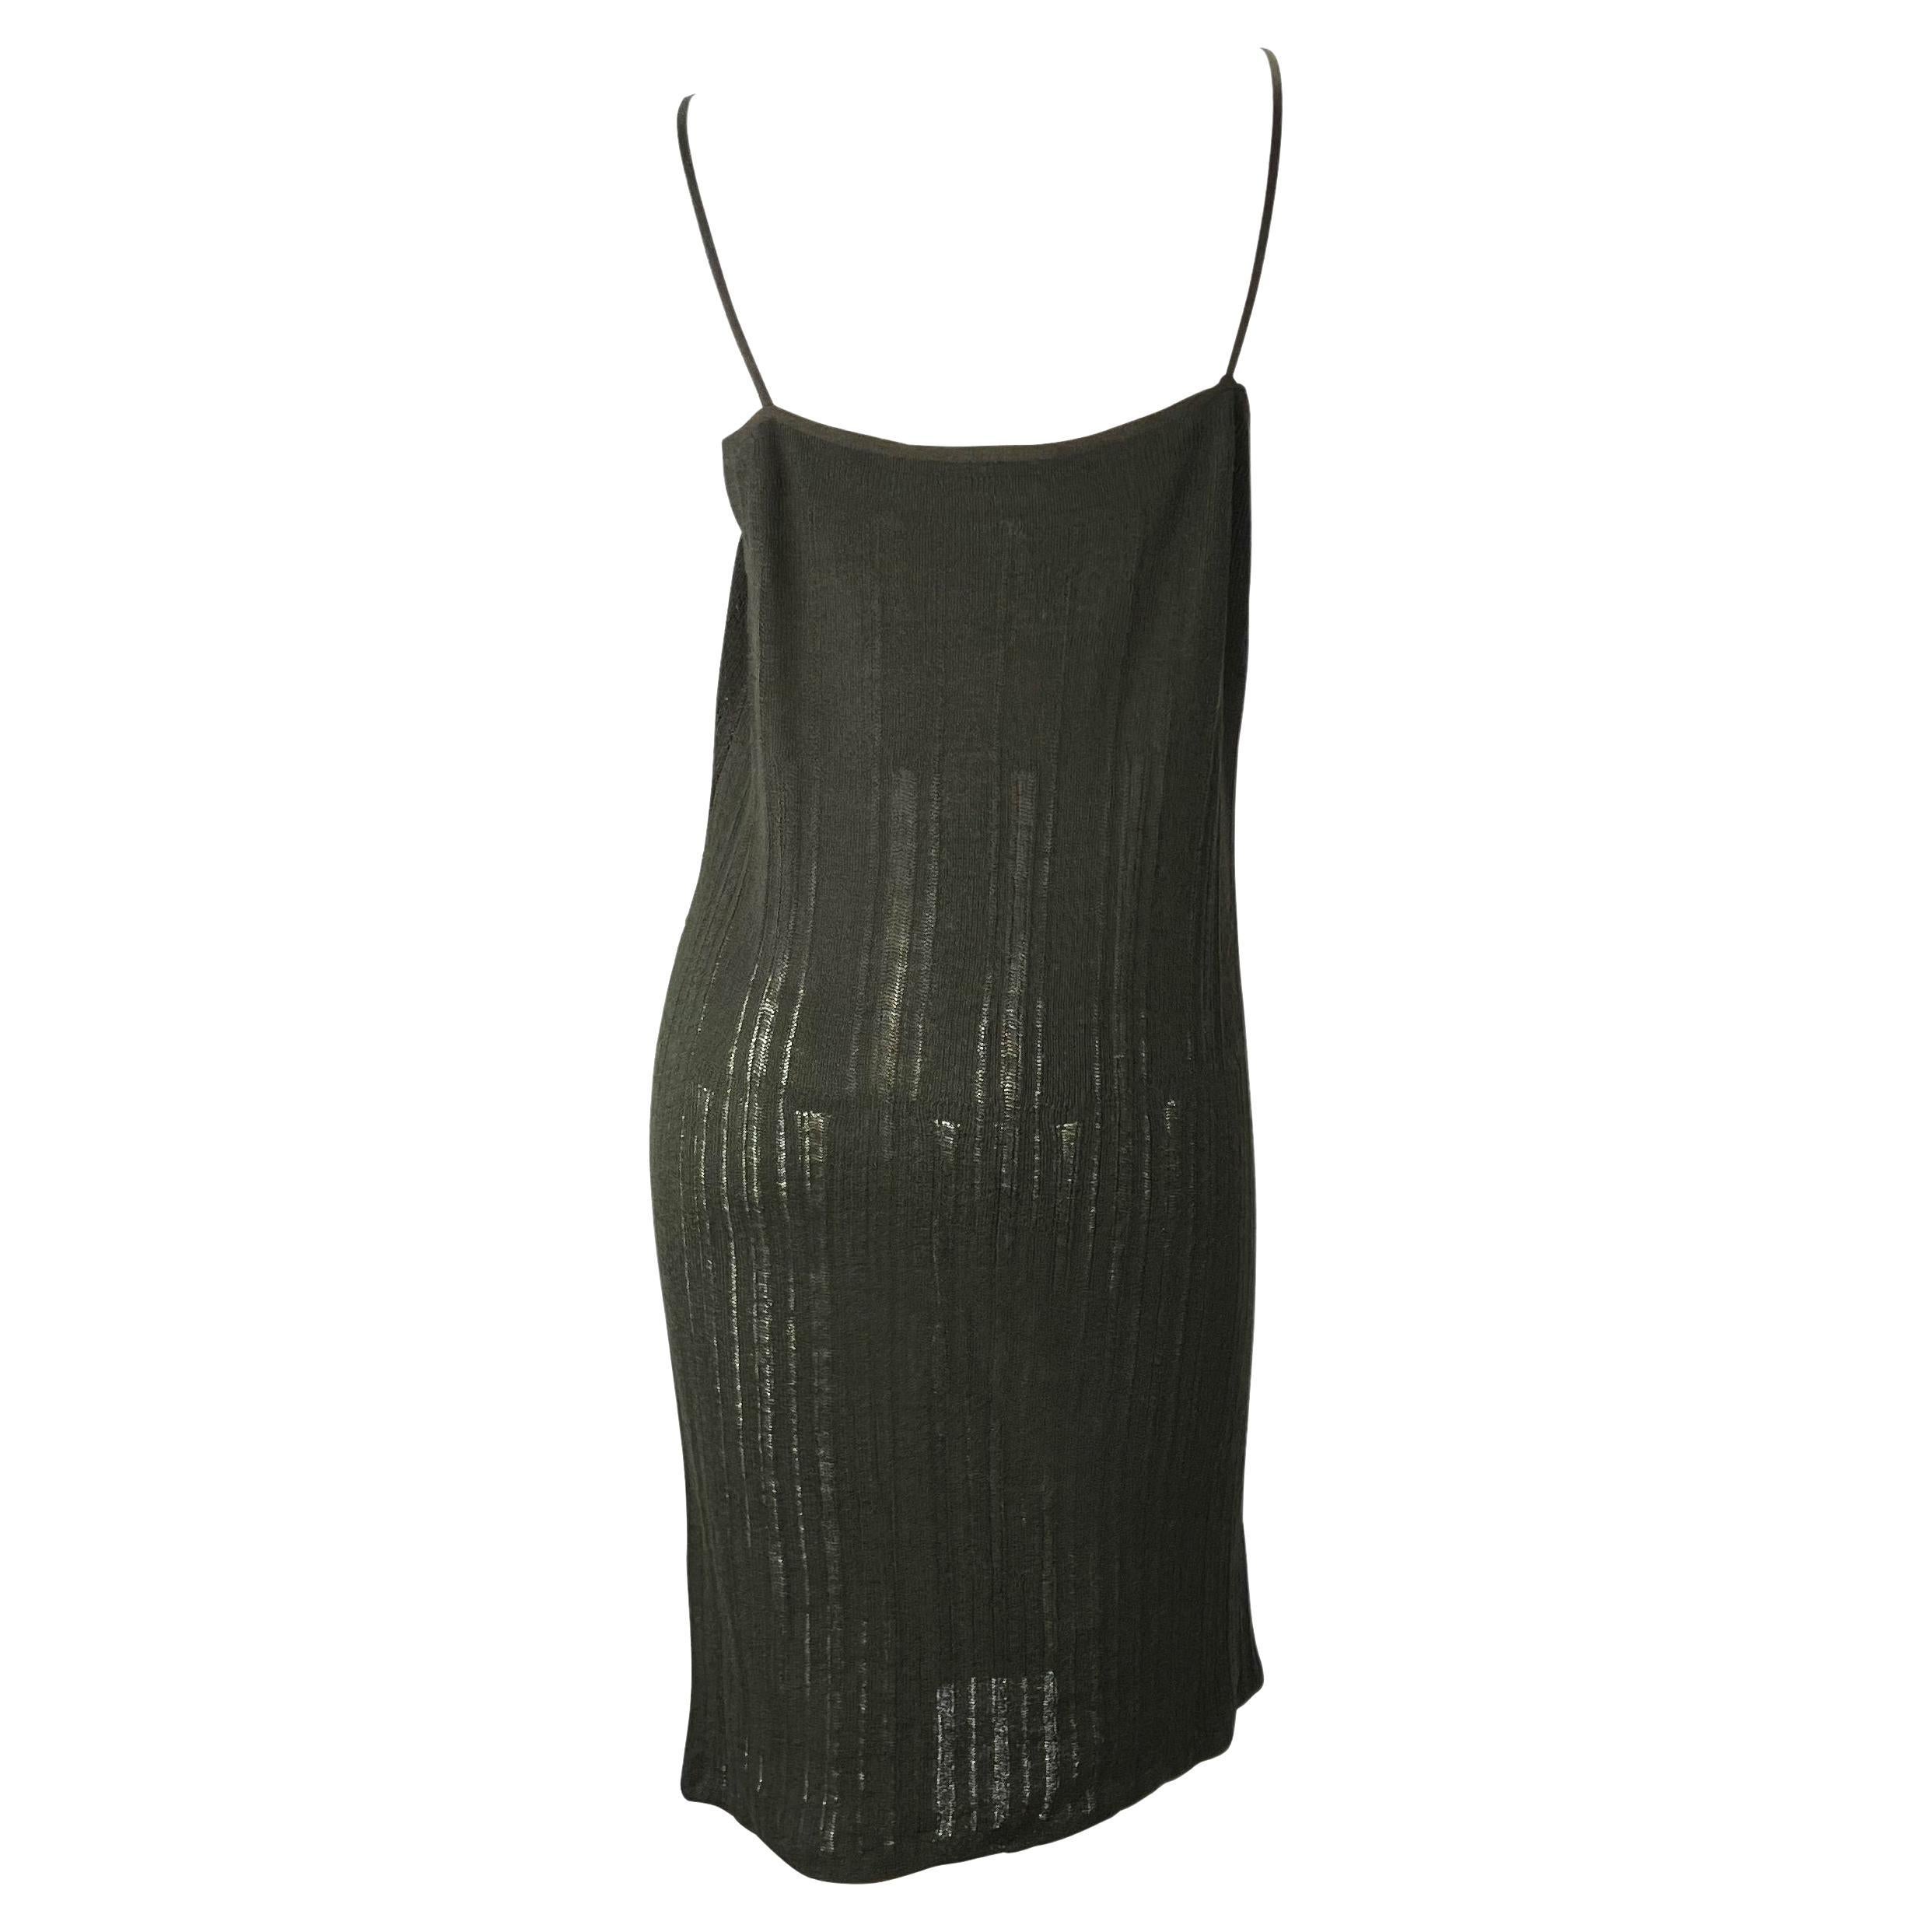 Black S/S 1997 Gucci by Tom Ford Runway Olive Green Sheer Knit Stretch Tube Dress